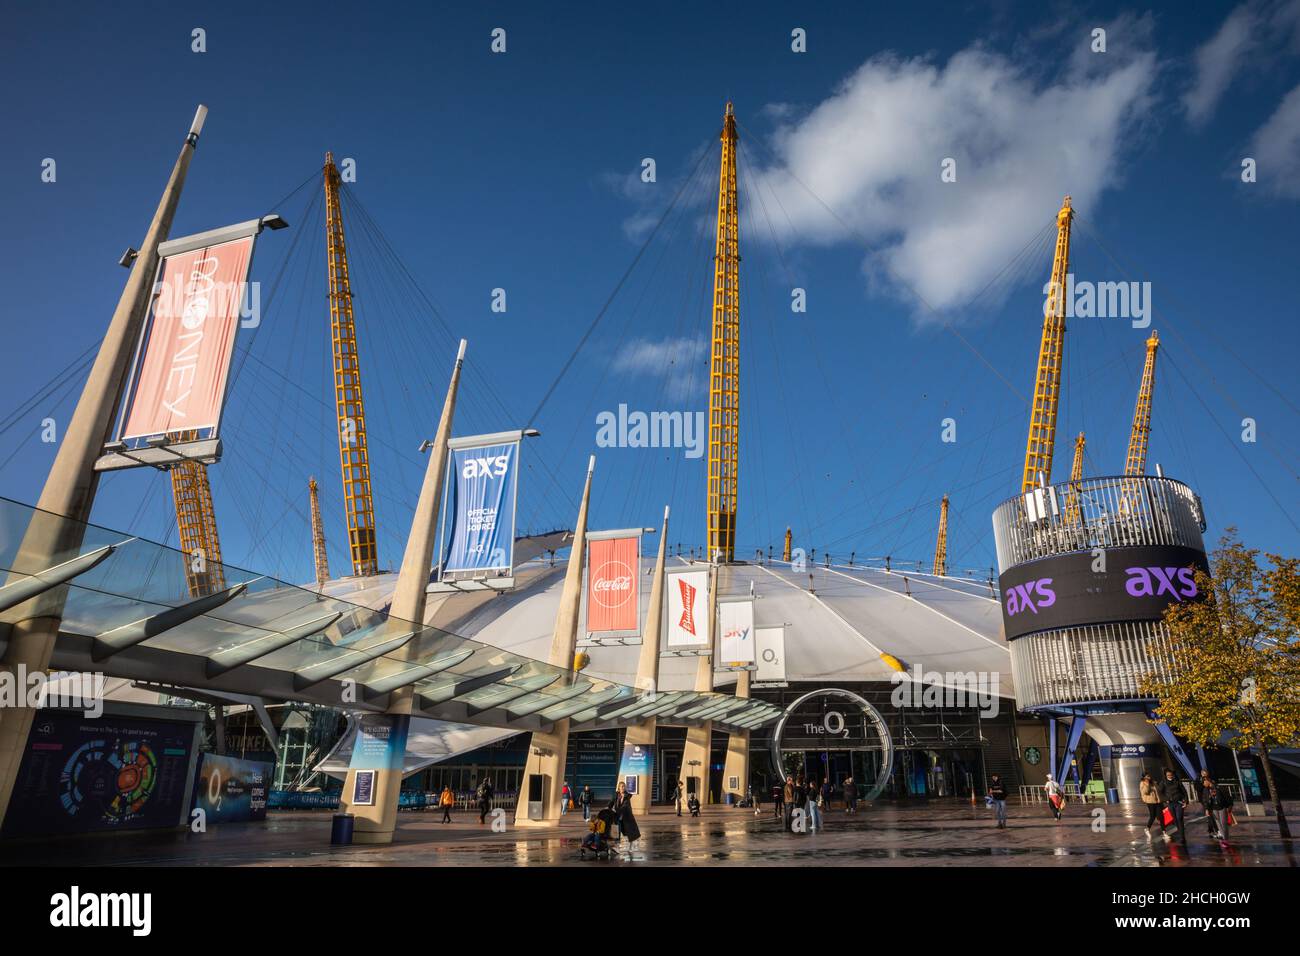 The O2 London arena, exterior, former Millennium Dome concert and event venue, Greenwich, London, England Stock Photo